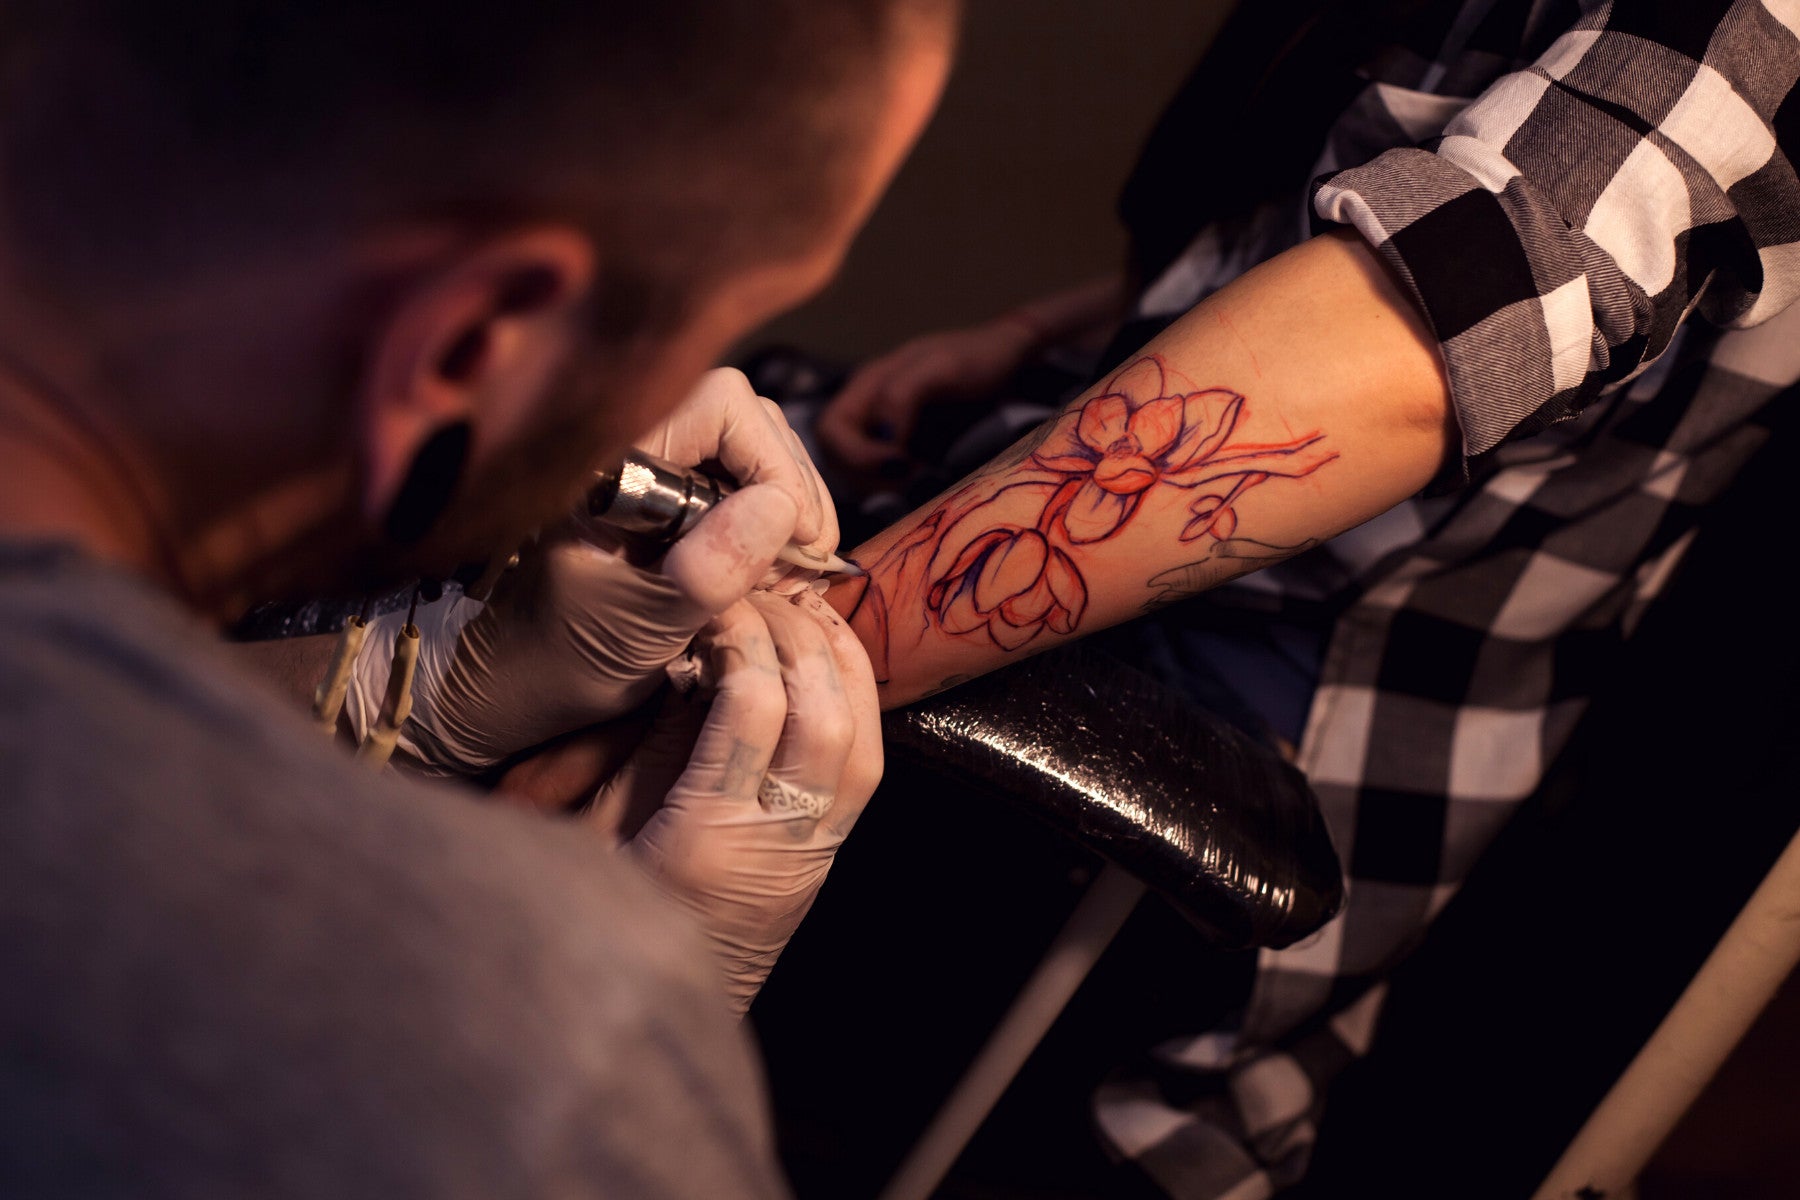 Male tattoo artist tattooing a large flower tattoo on a persons forearm